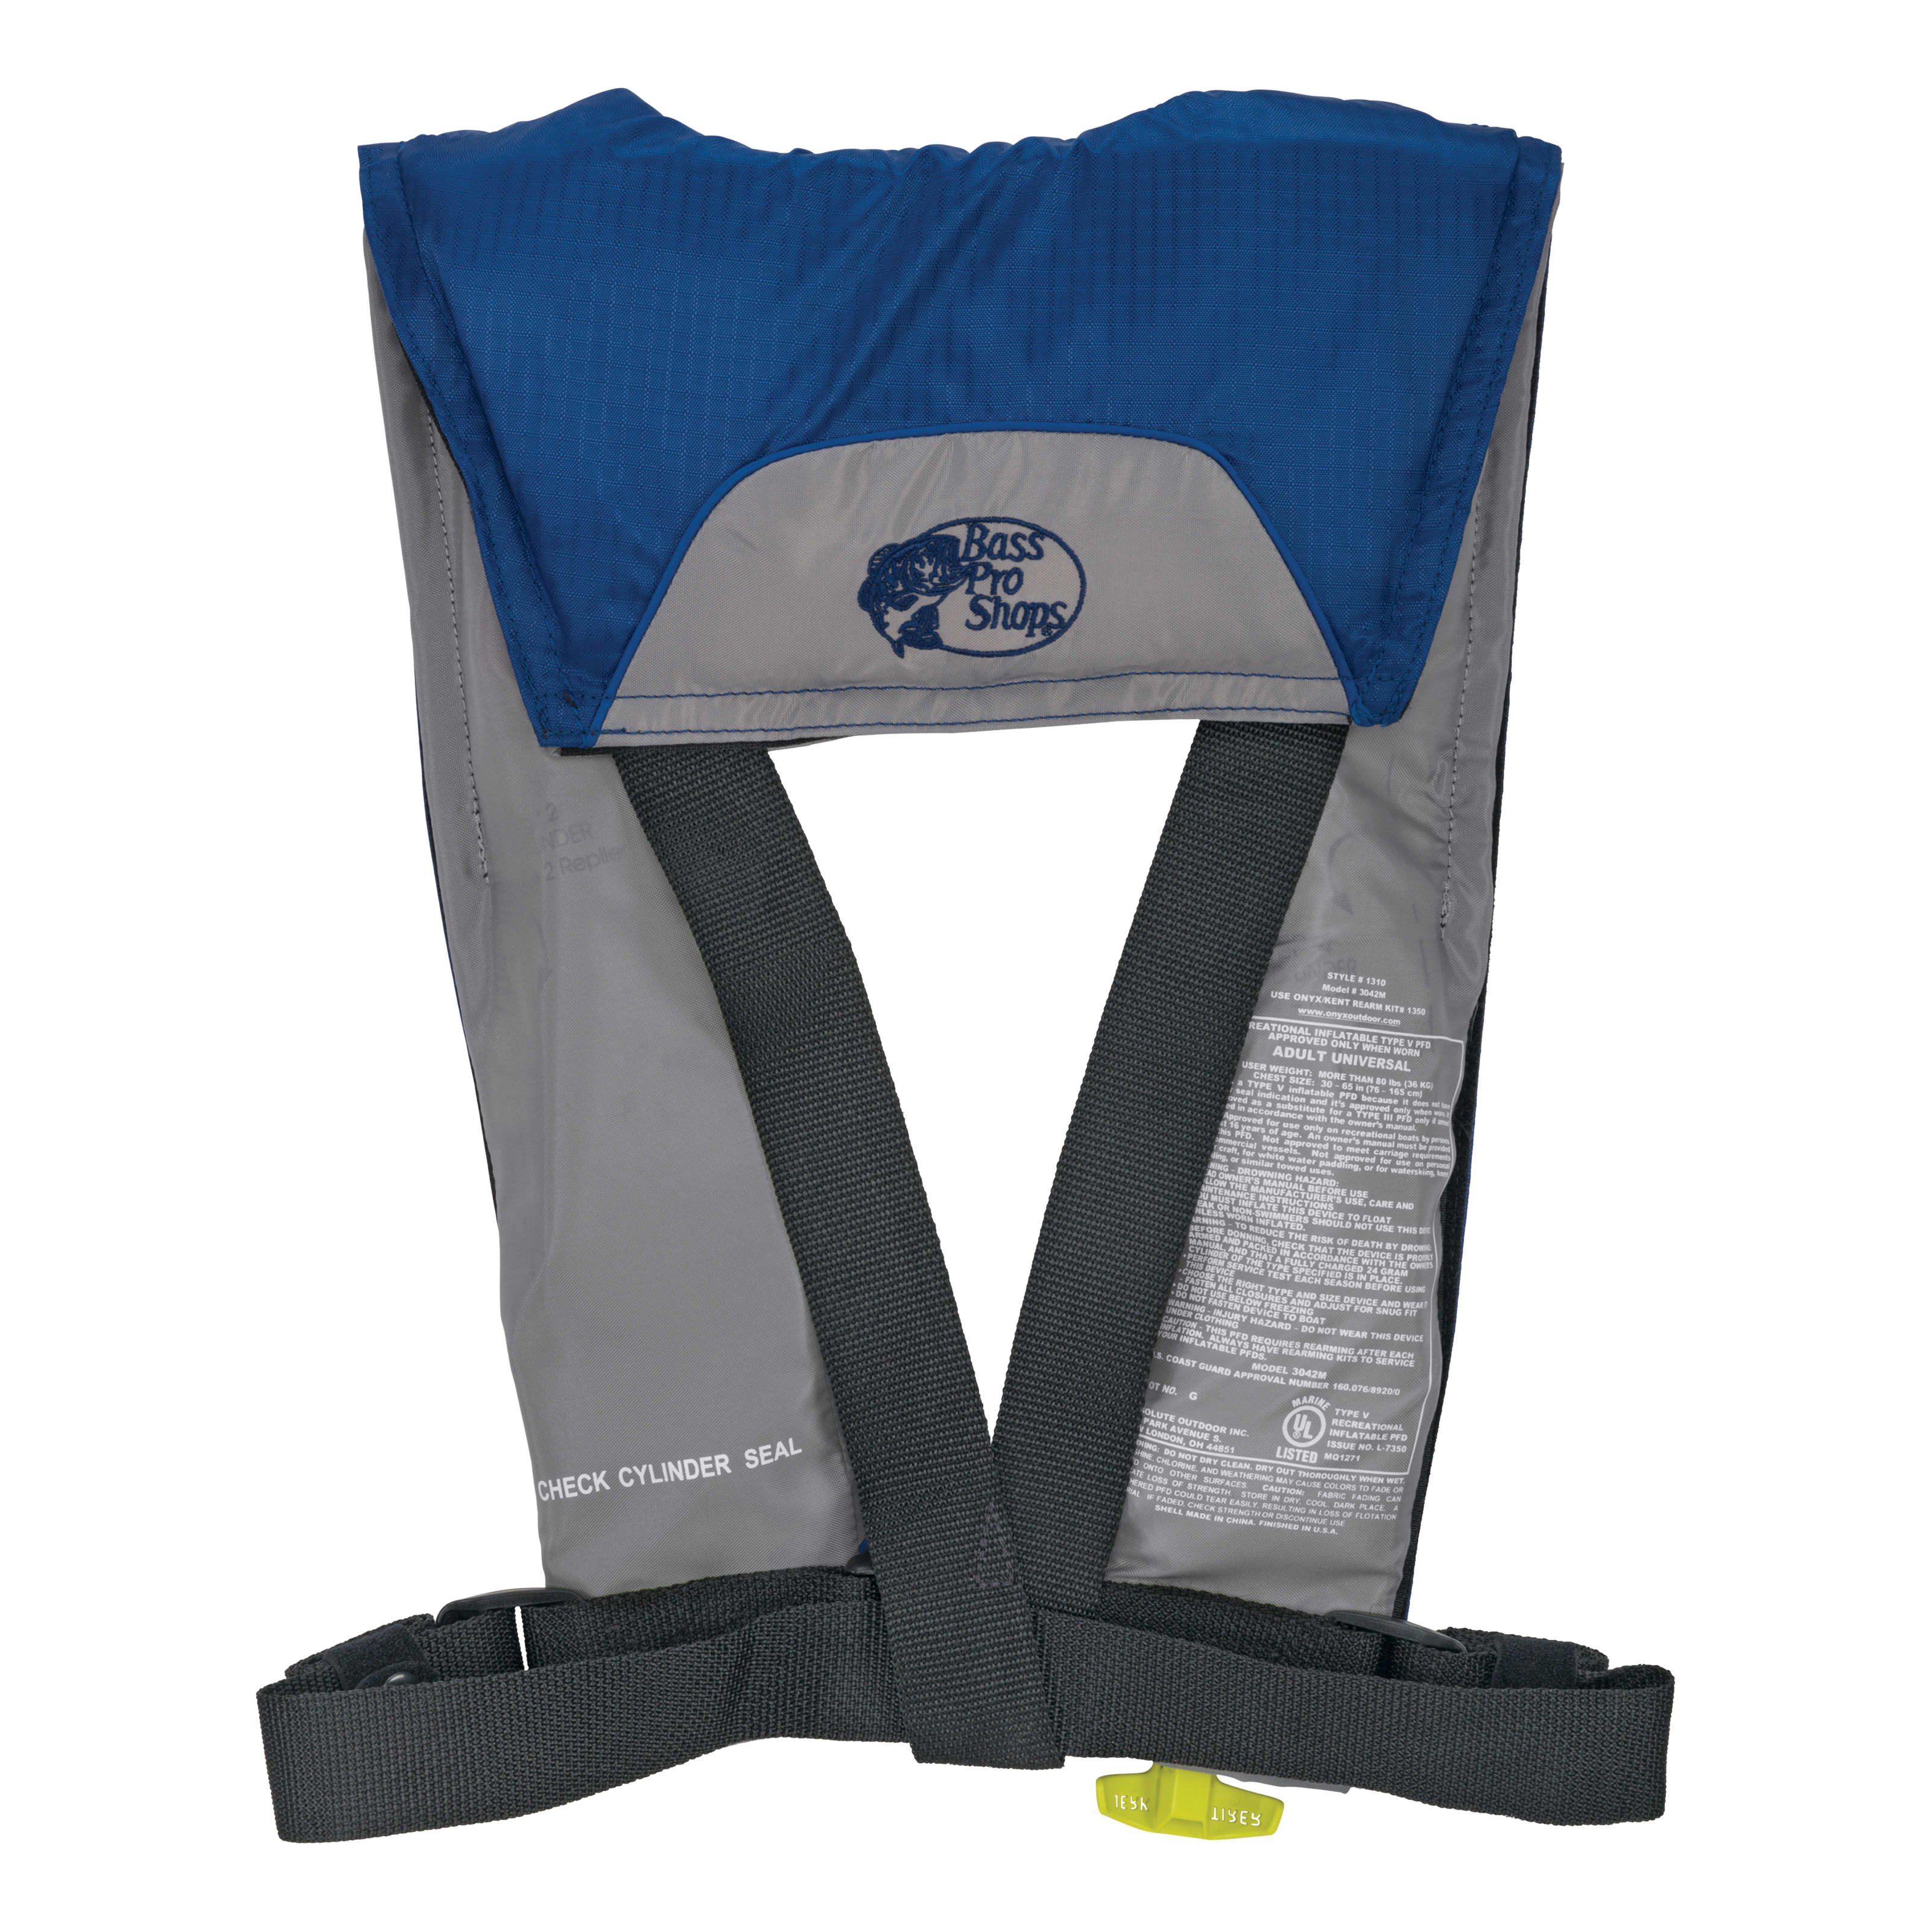 Bass Pro Shops® M-24 Manual Inflatable Life Vest - Blue/Grey - Back View